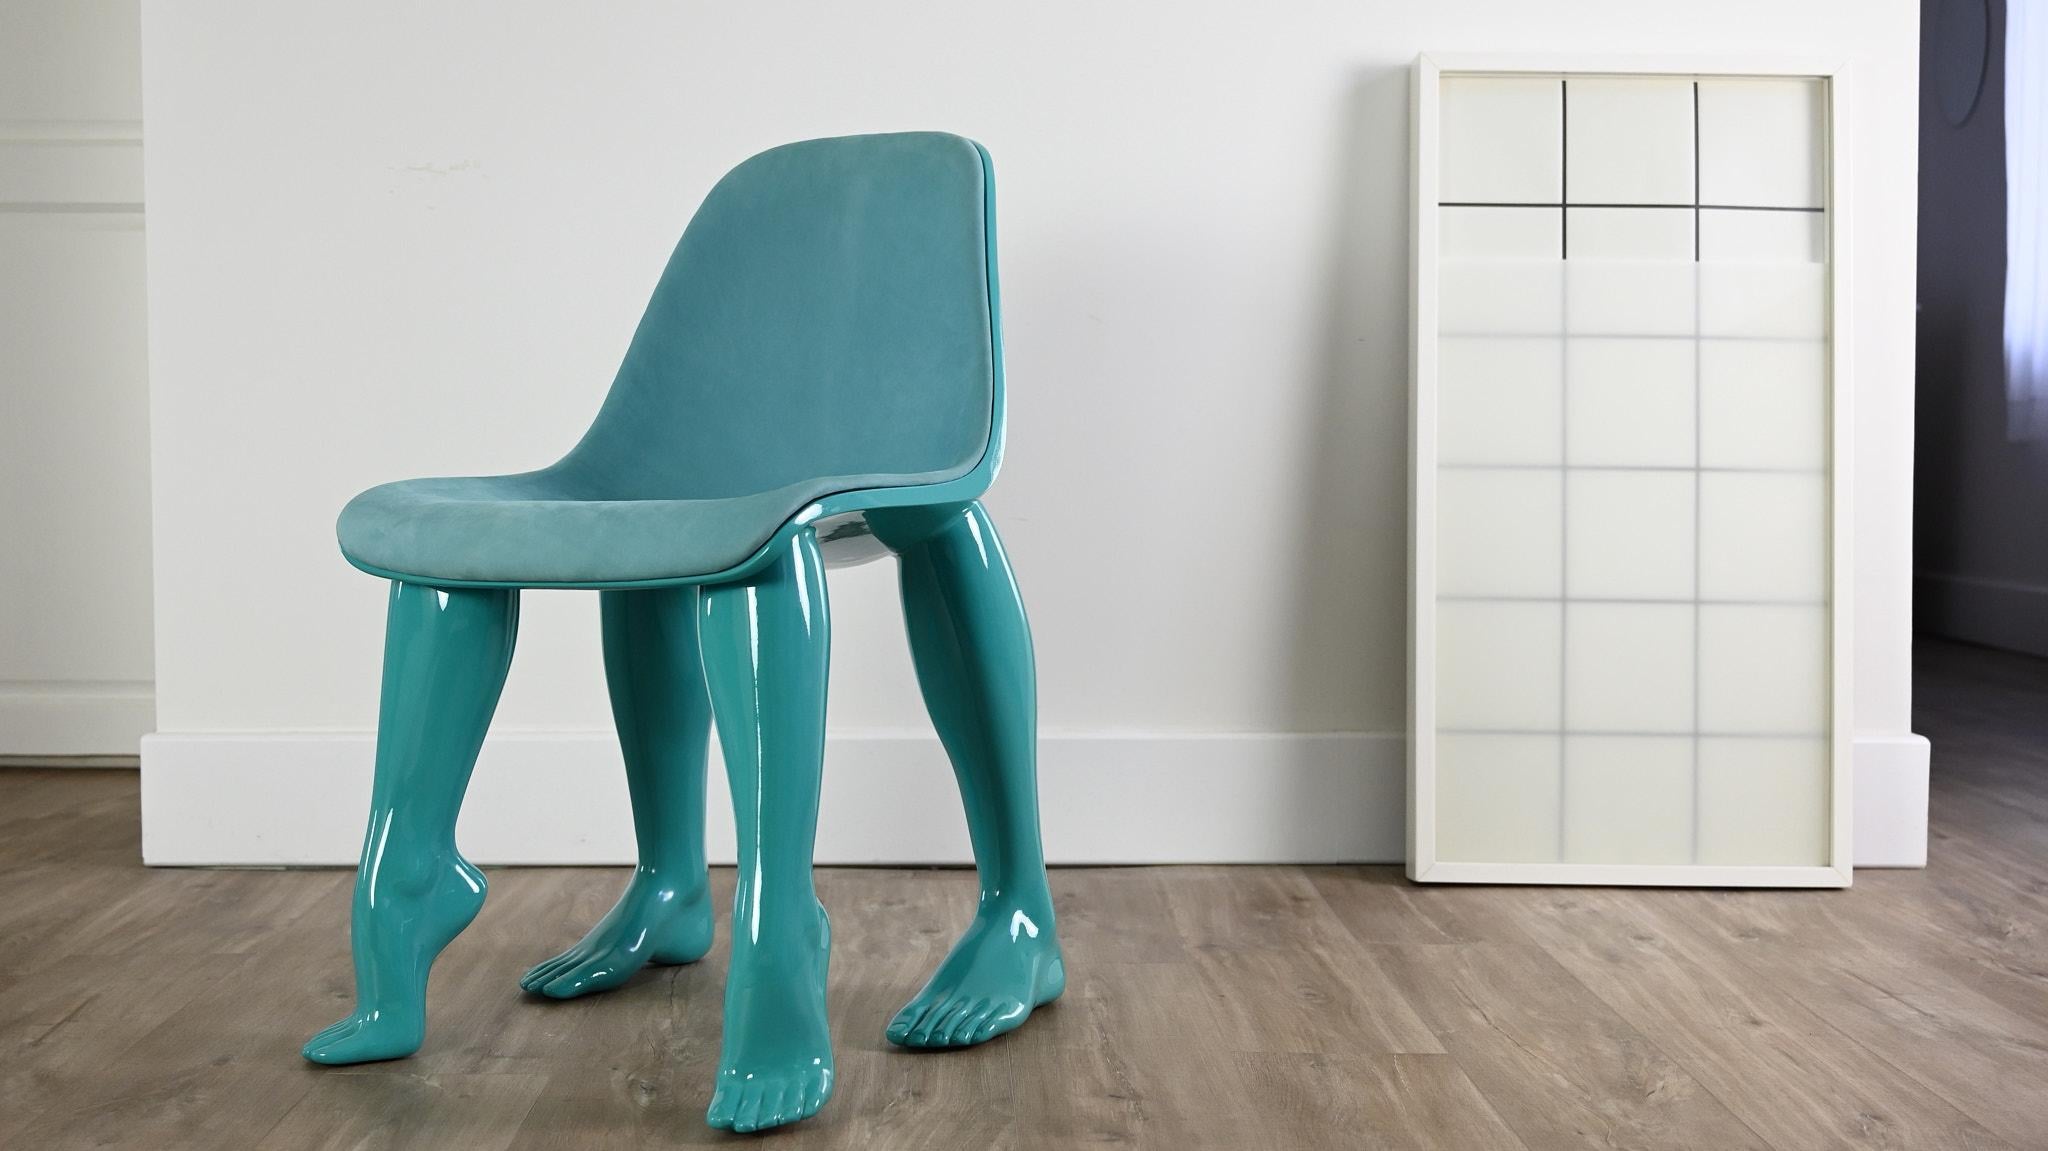 Contemporary Pharrell Williams Perspective Chair for Domeau & Pérès Resin Leather France For Sale